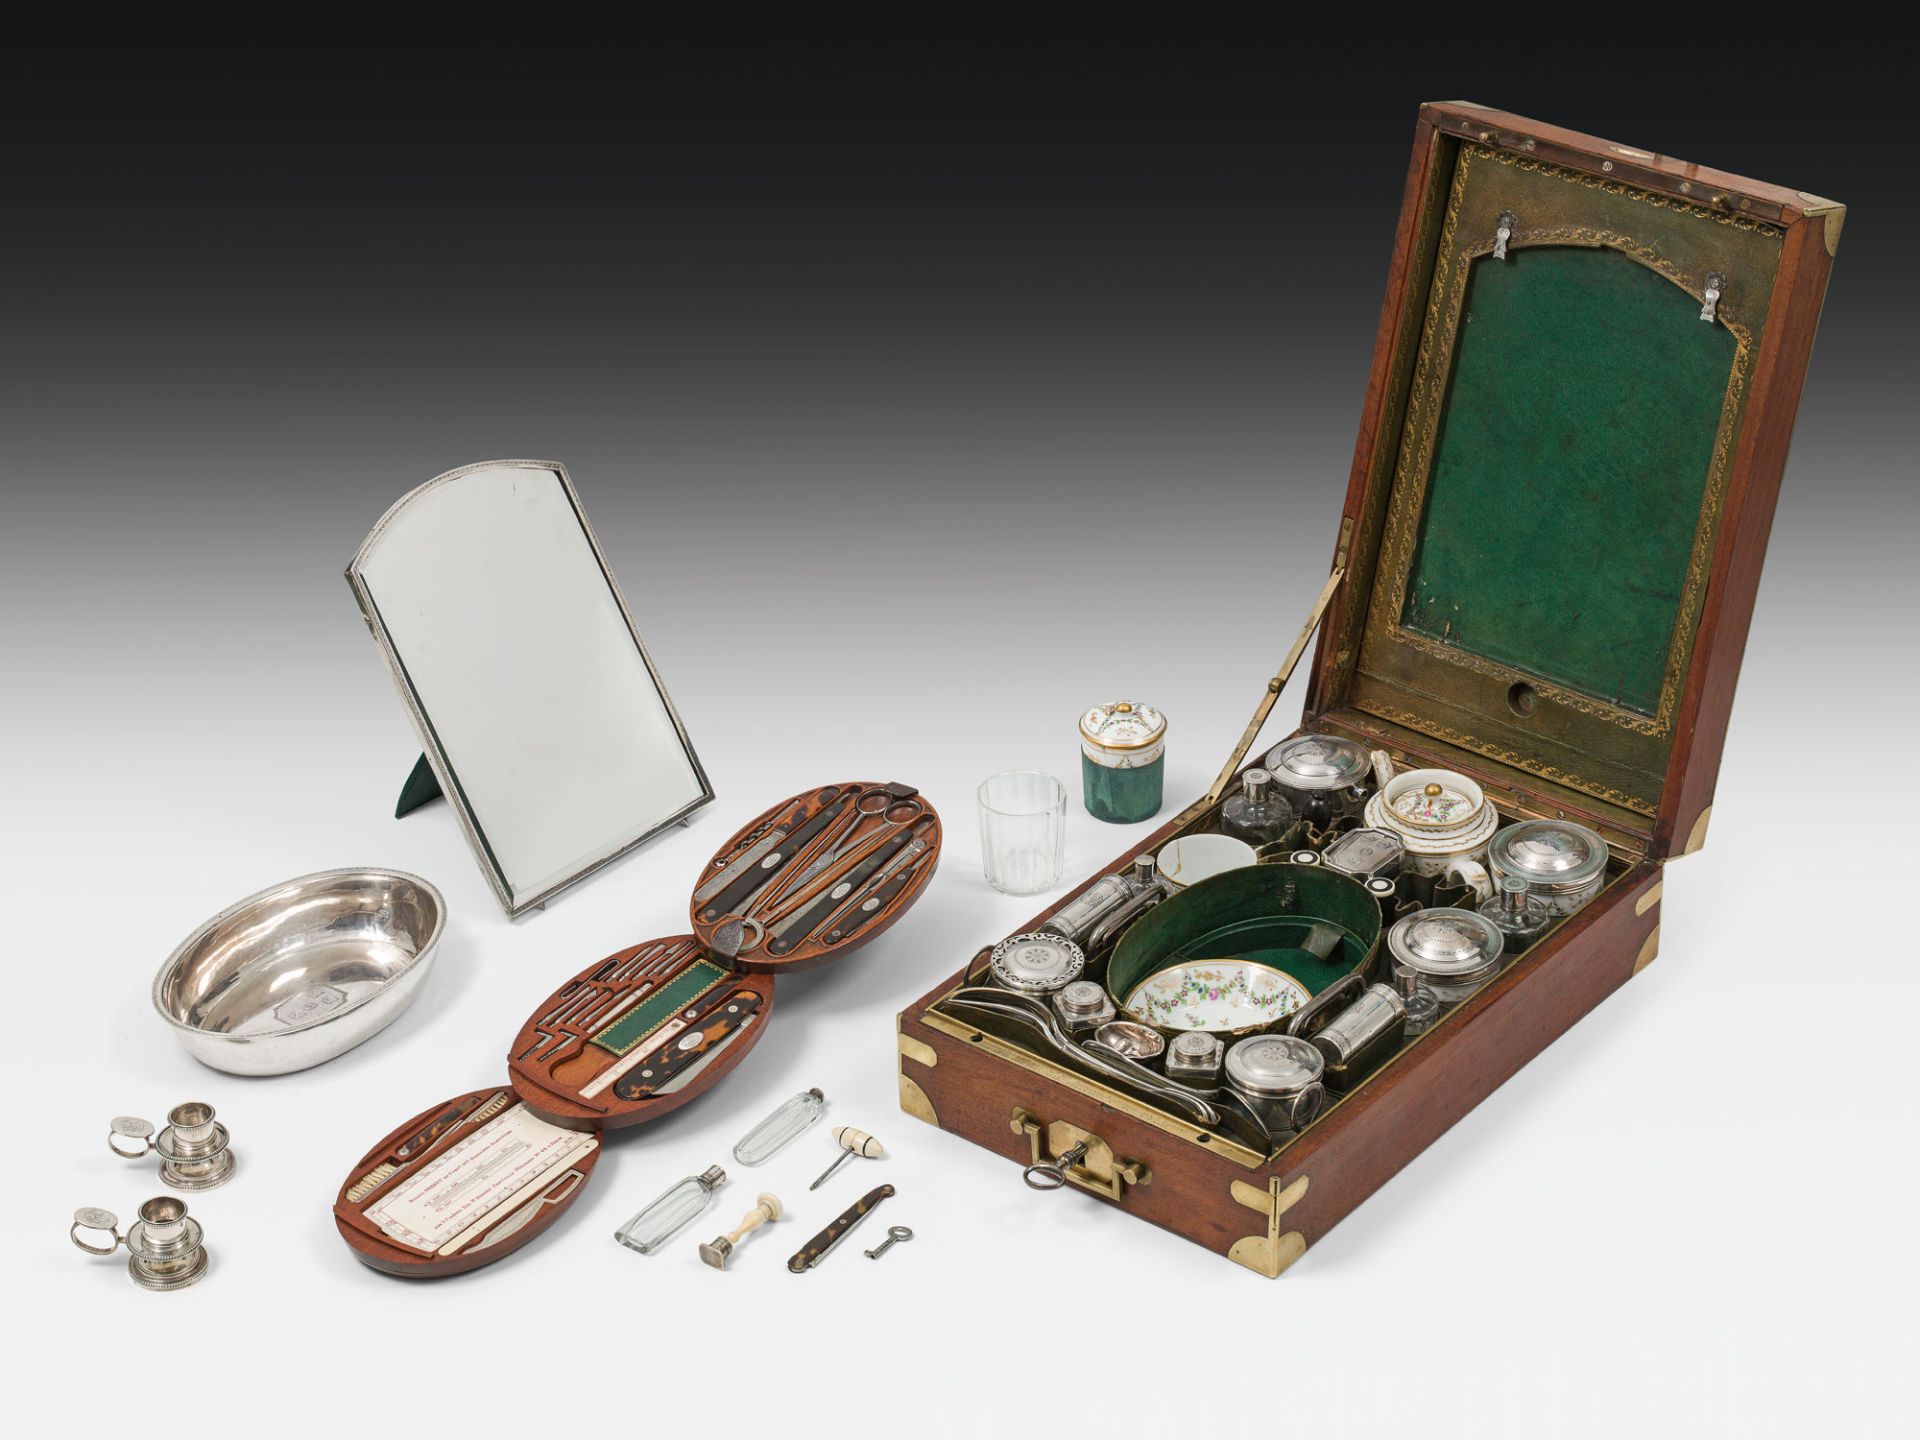 Travel kitsilver, porcelain, glass, wood, leather; individual pieces partly marked, inscribed and